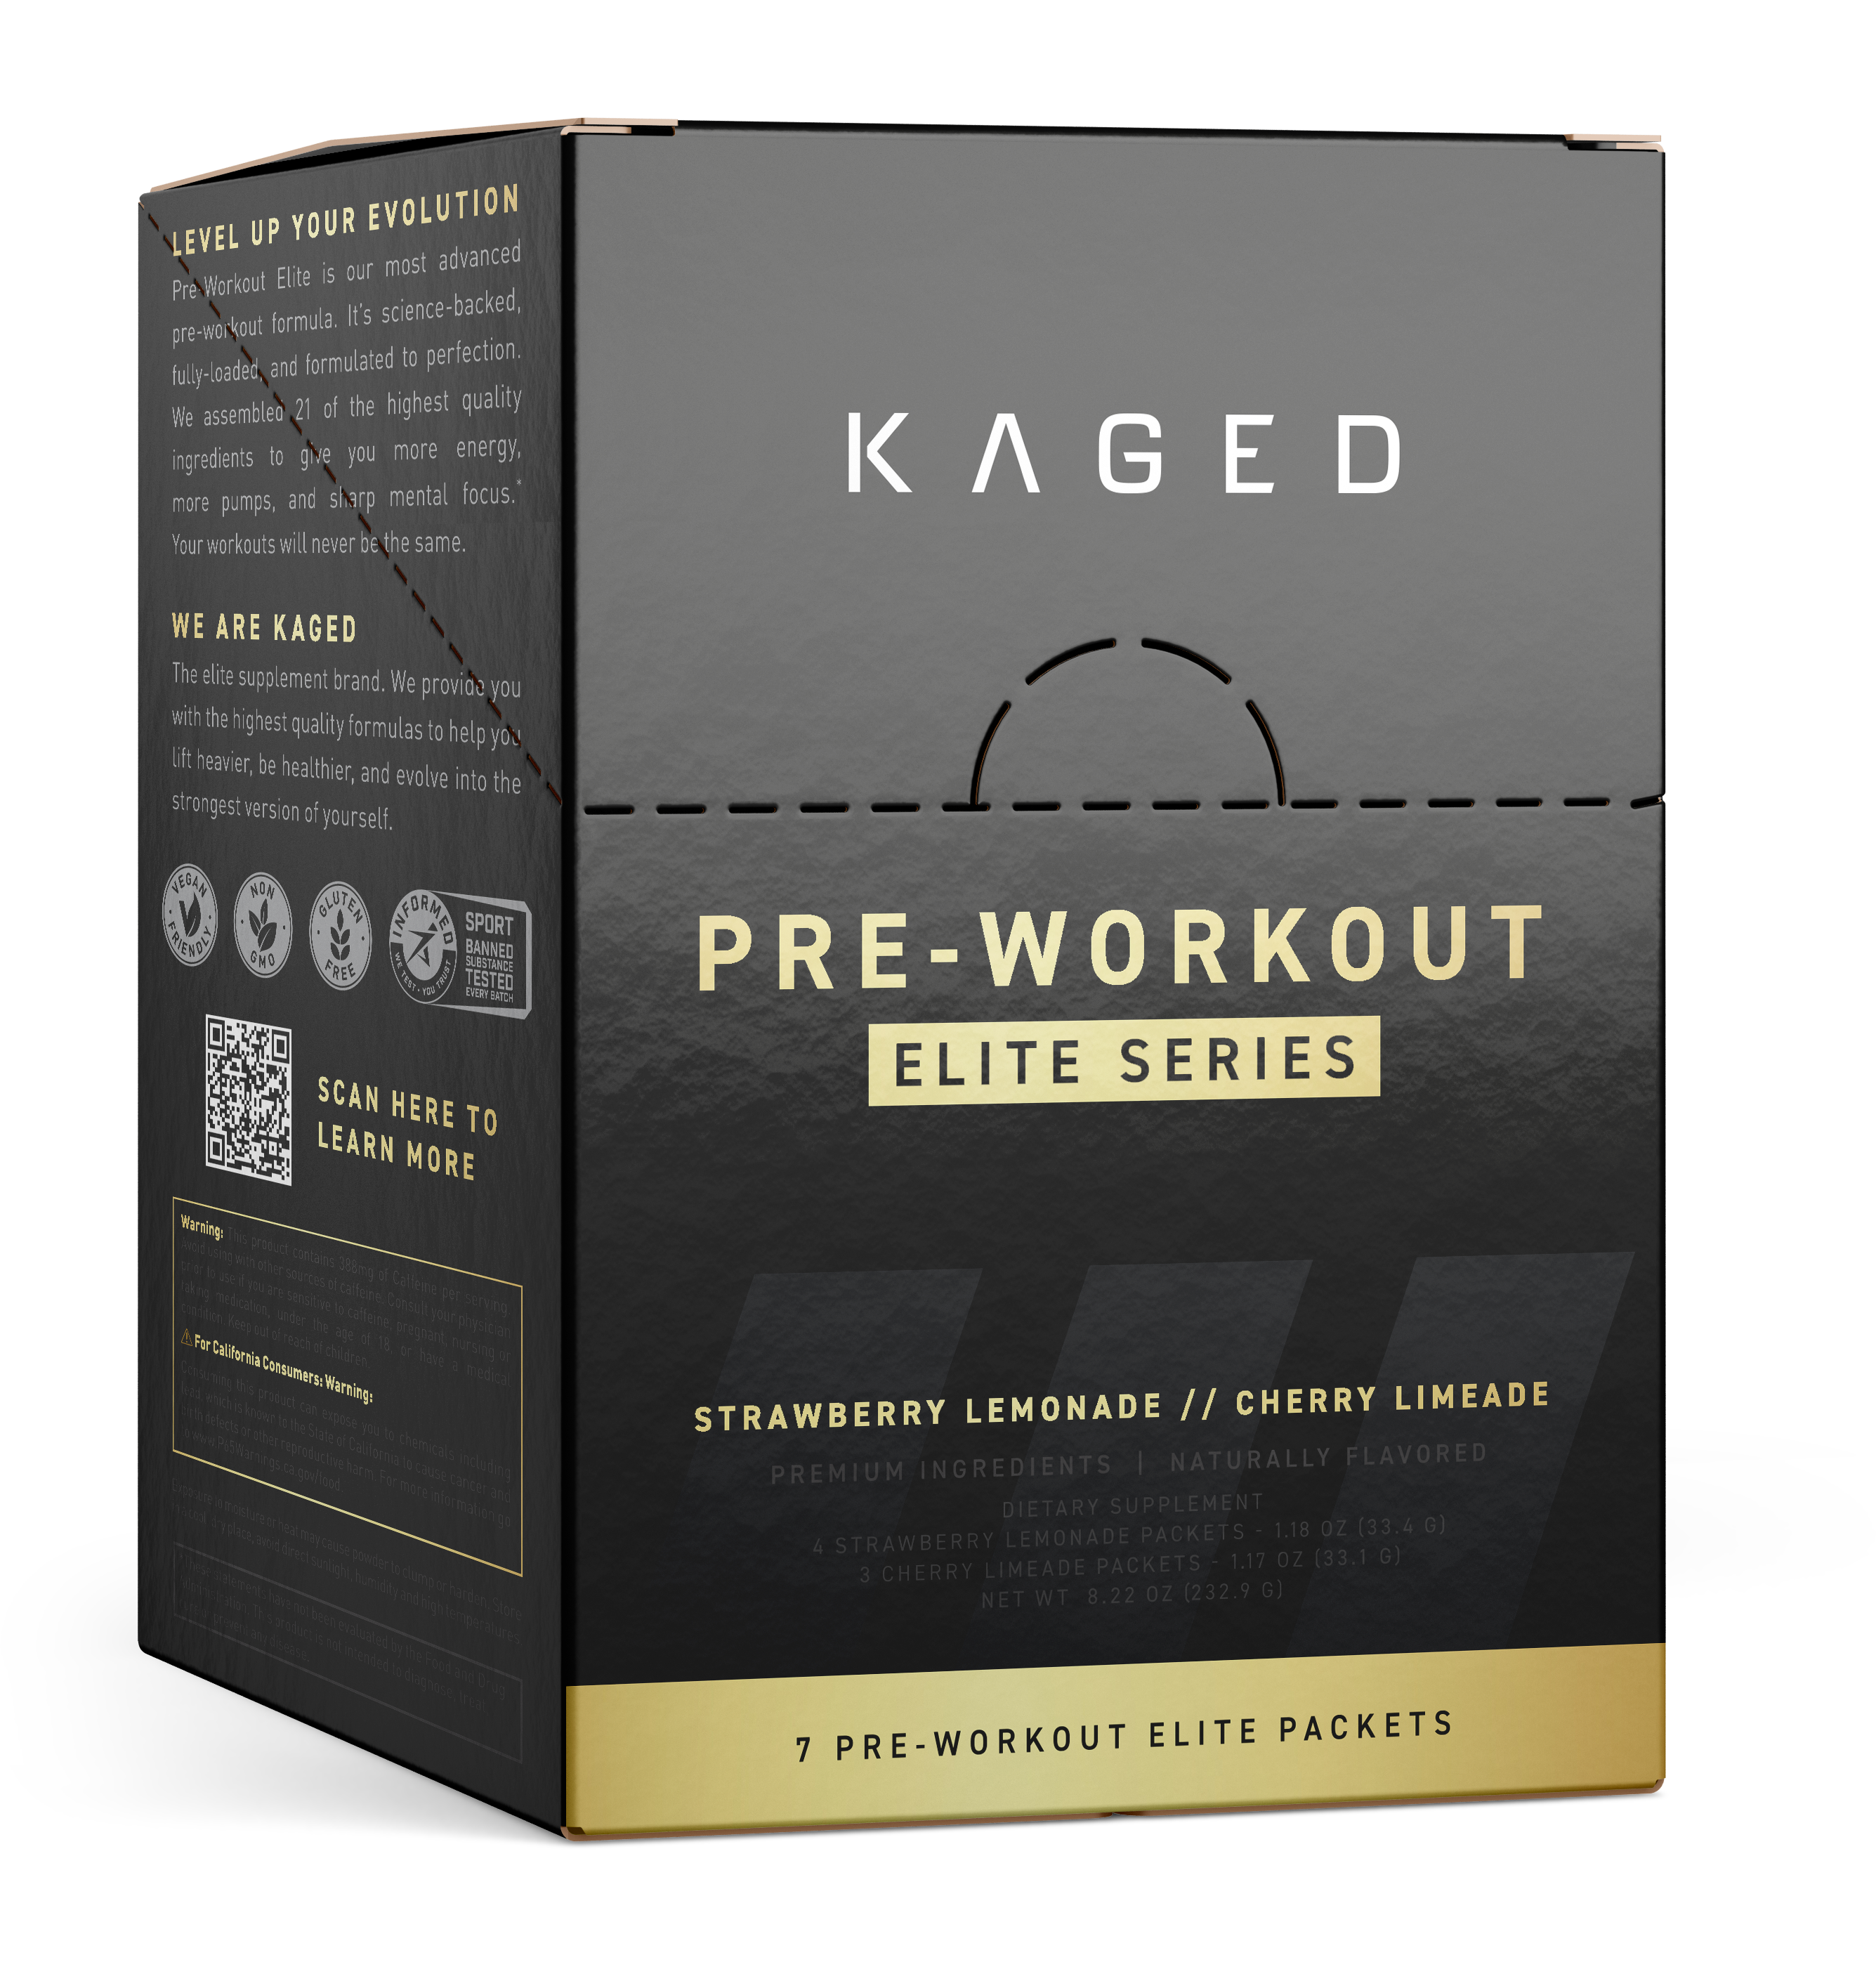 Kaged Pre-Workout Elite Single Serving Packets